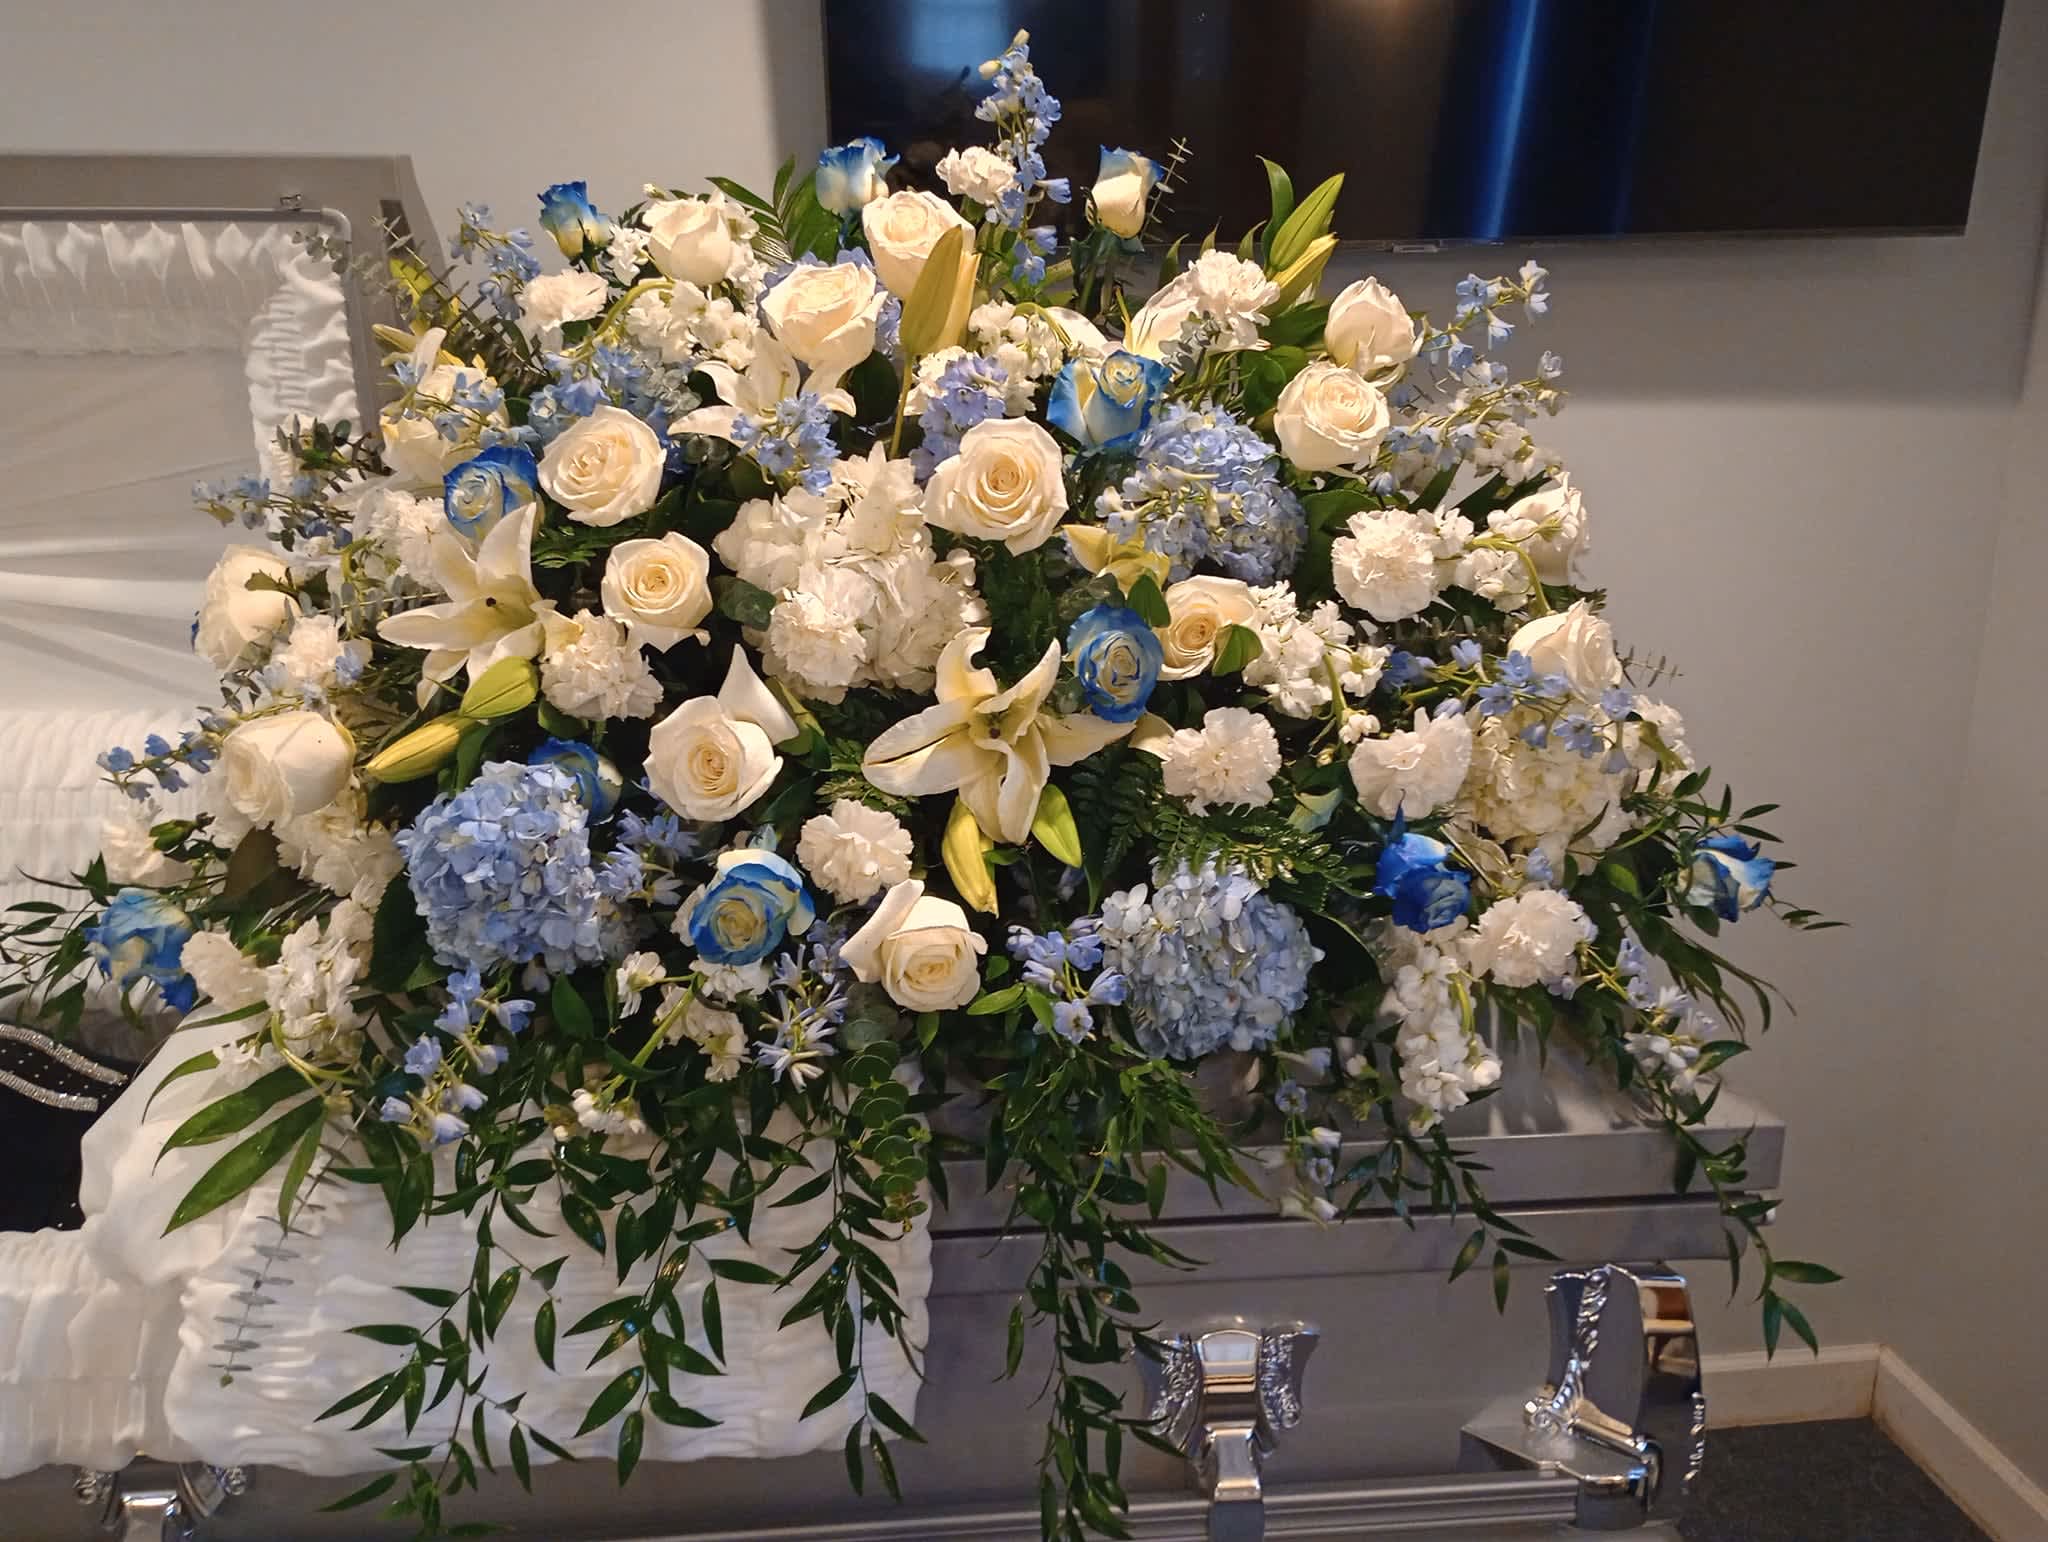 Light of Love Casket Spray - A beautiful tribute with blue/white hydrangeas, blue/white roses, white carnatons, lillies, and blue stock tied together with lush greenery.